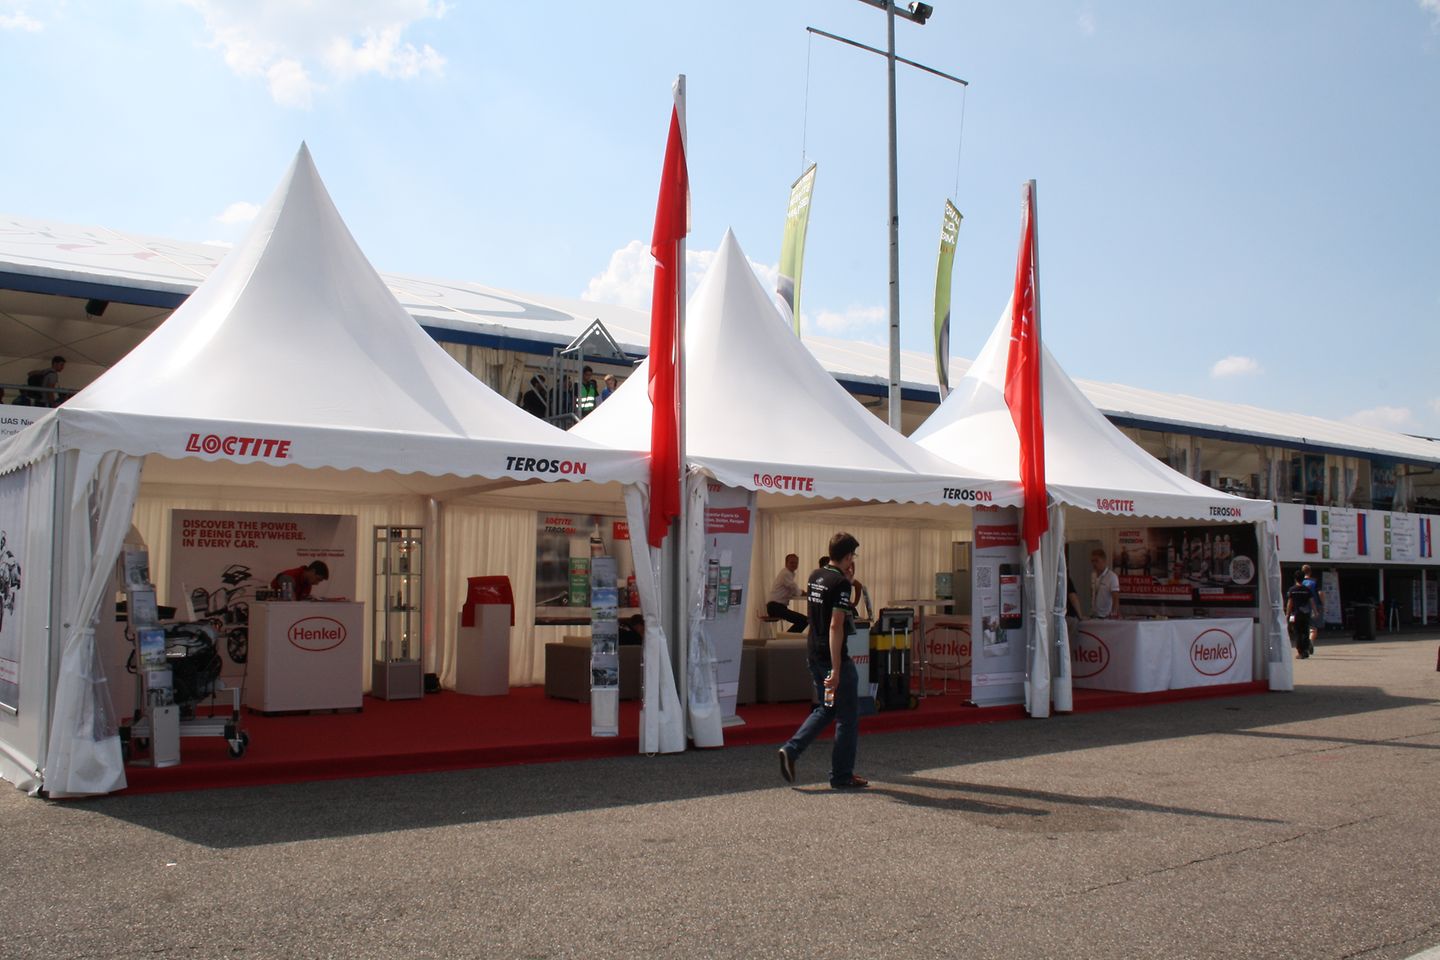 First aid in case of emergency: If conventional methods such as welding, soldering and screw-fixing fail, the technology experts help out by offering their technical know-how and products in the Henkel marquee.